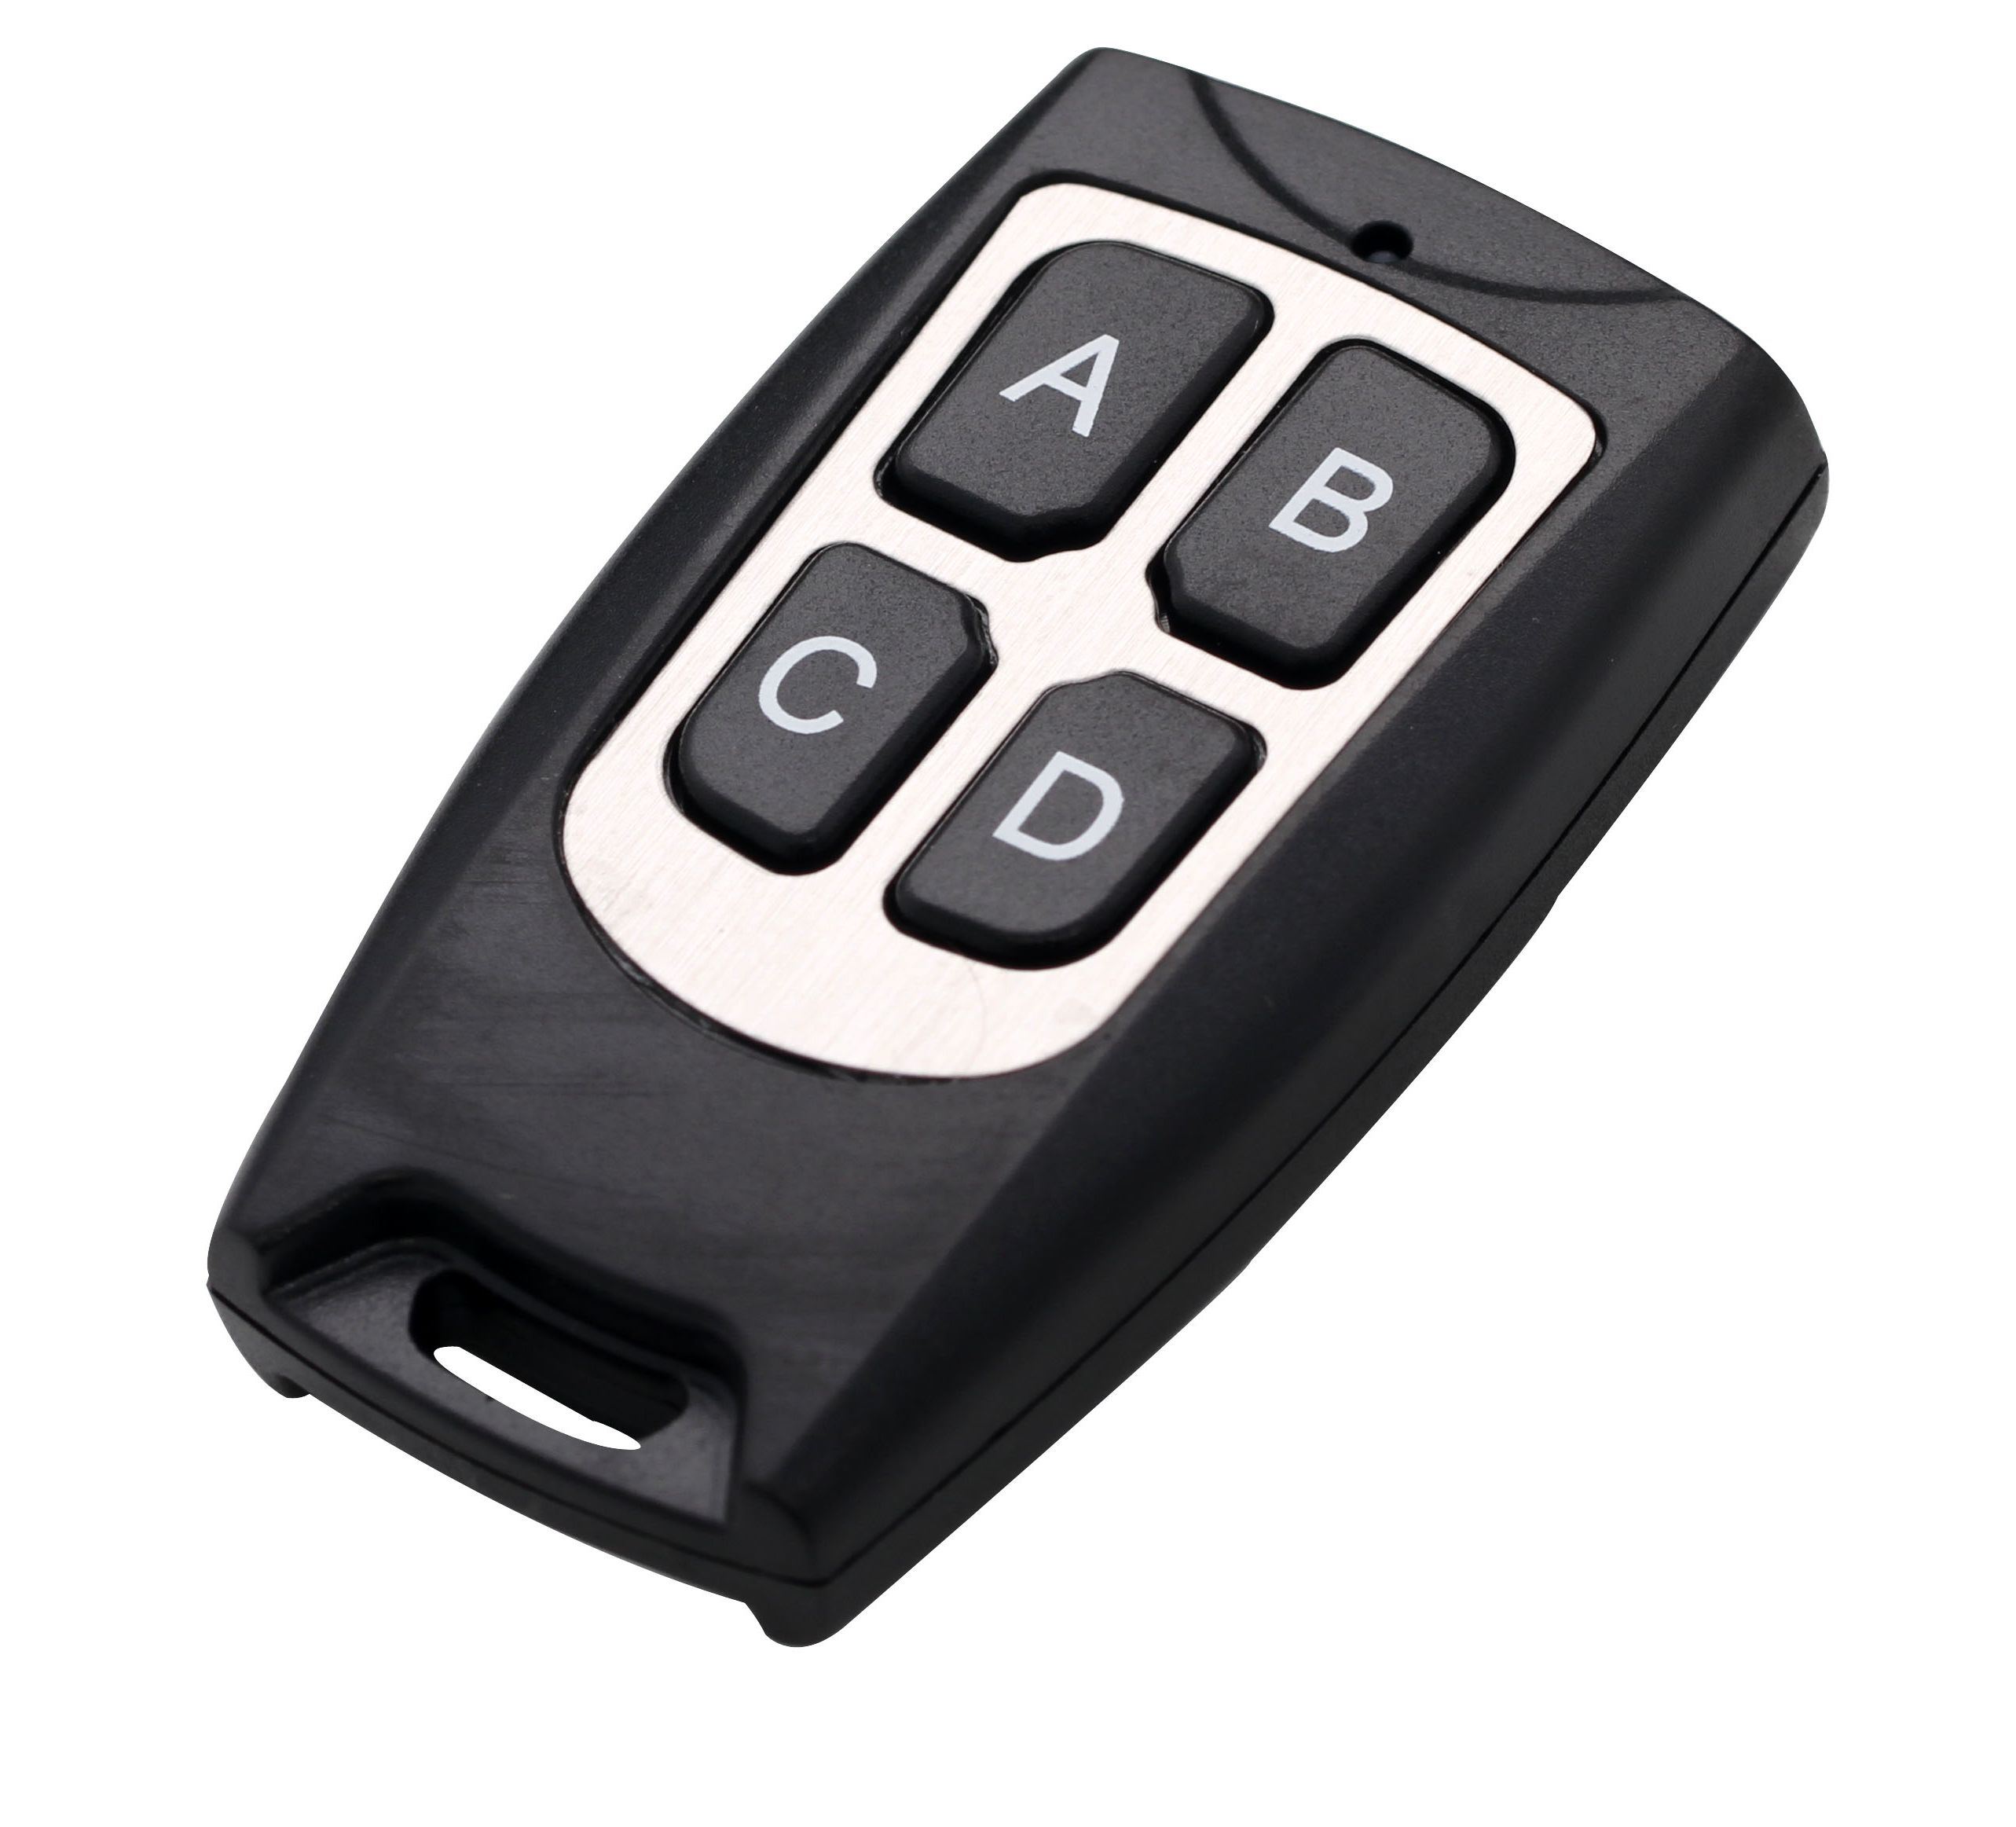 4 Buttons Universal Remote Control for Access Control